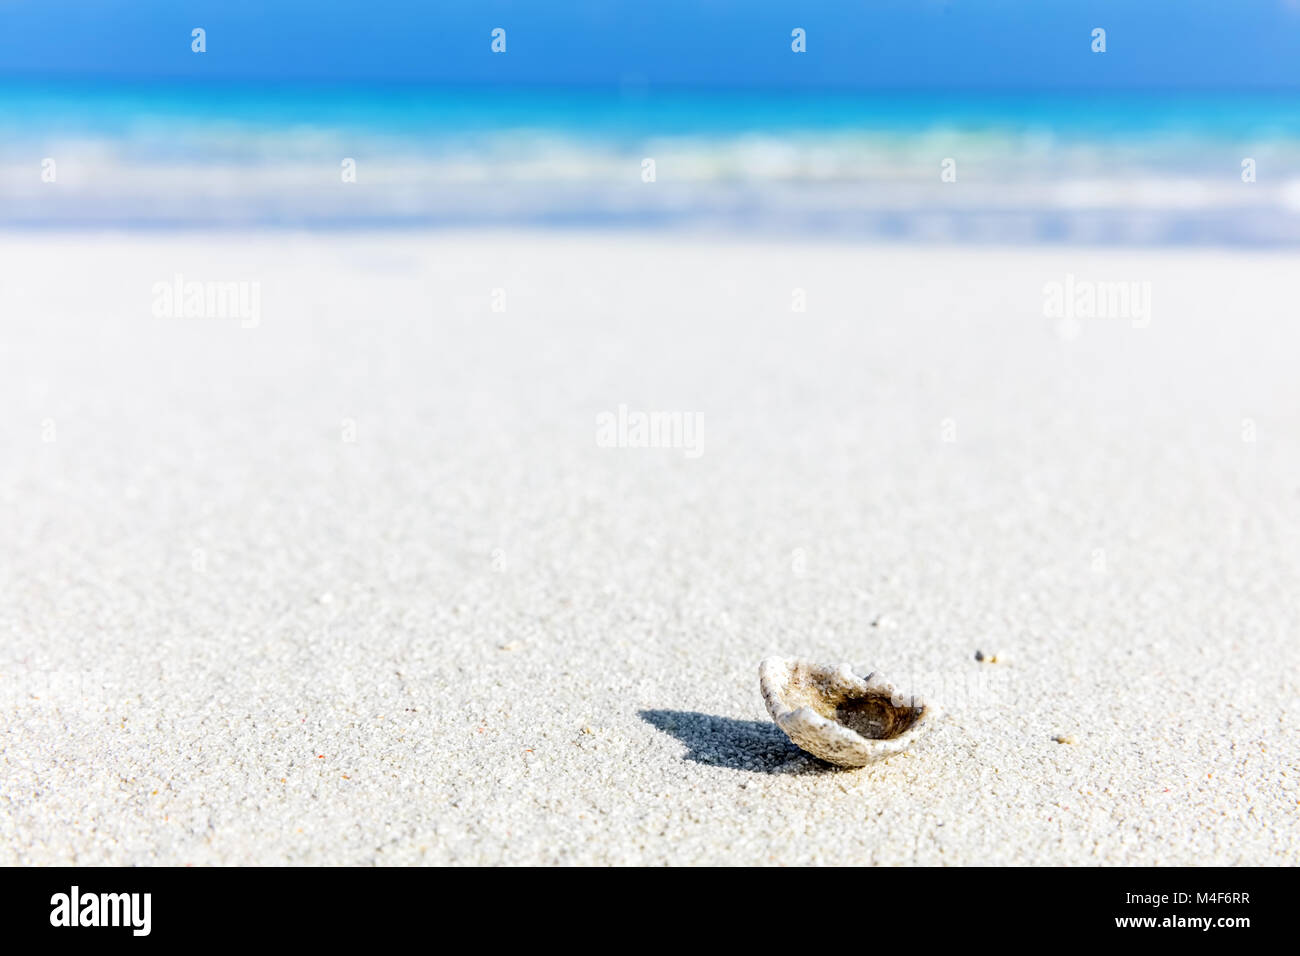 Shell, coral reef on sandy tropical beach in Maldives Stock Photo